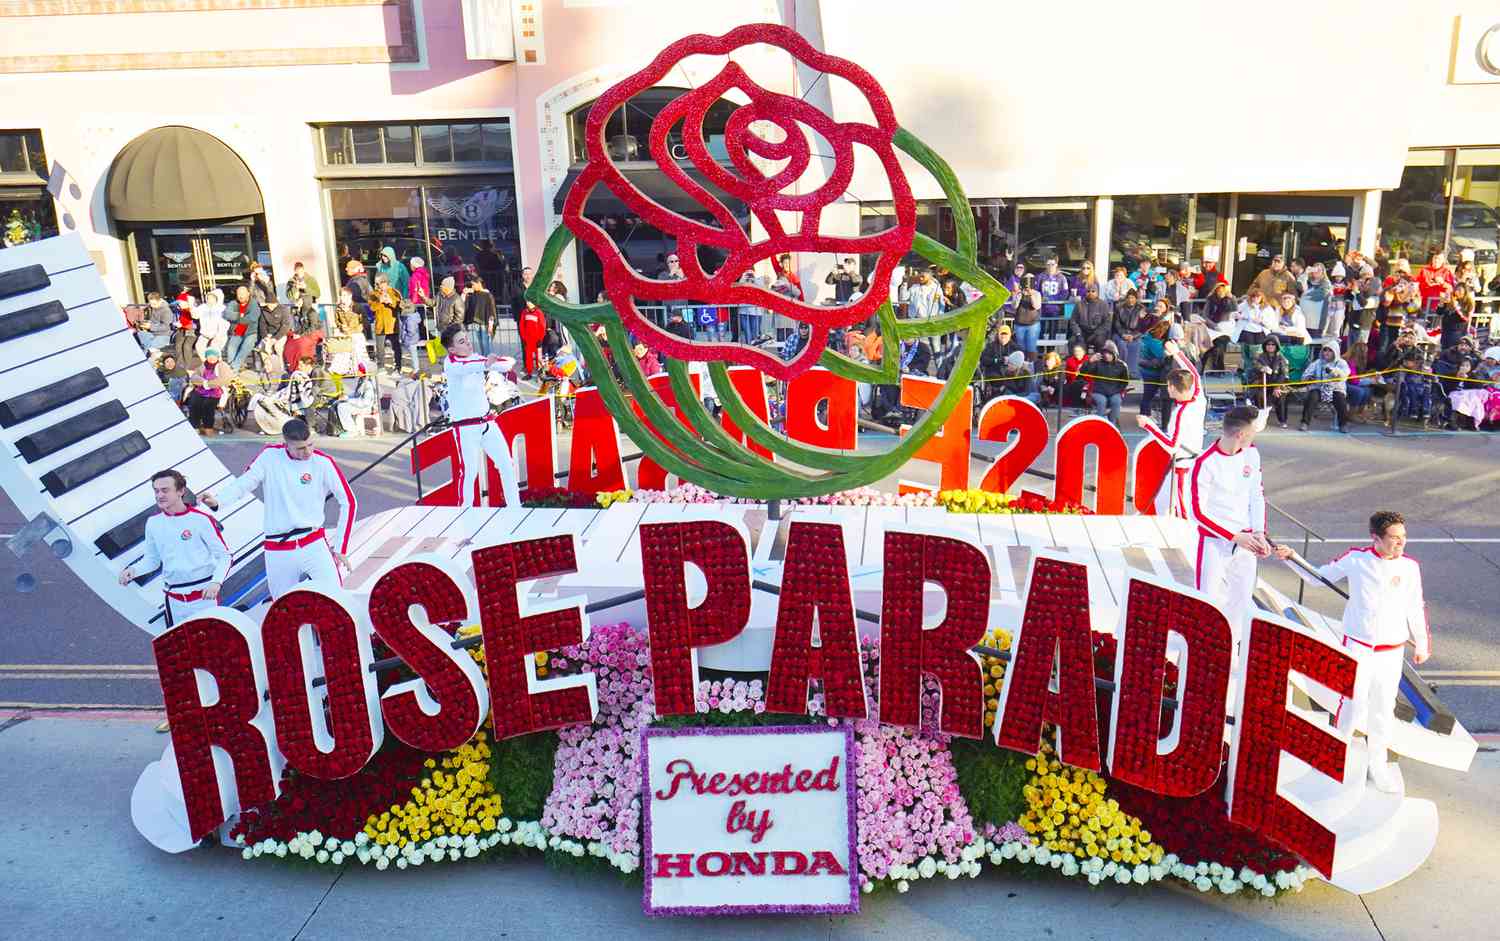 Rose Parage float presented by Honda